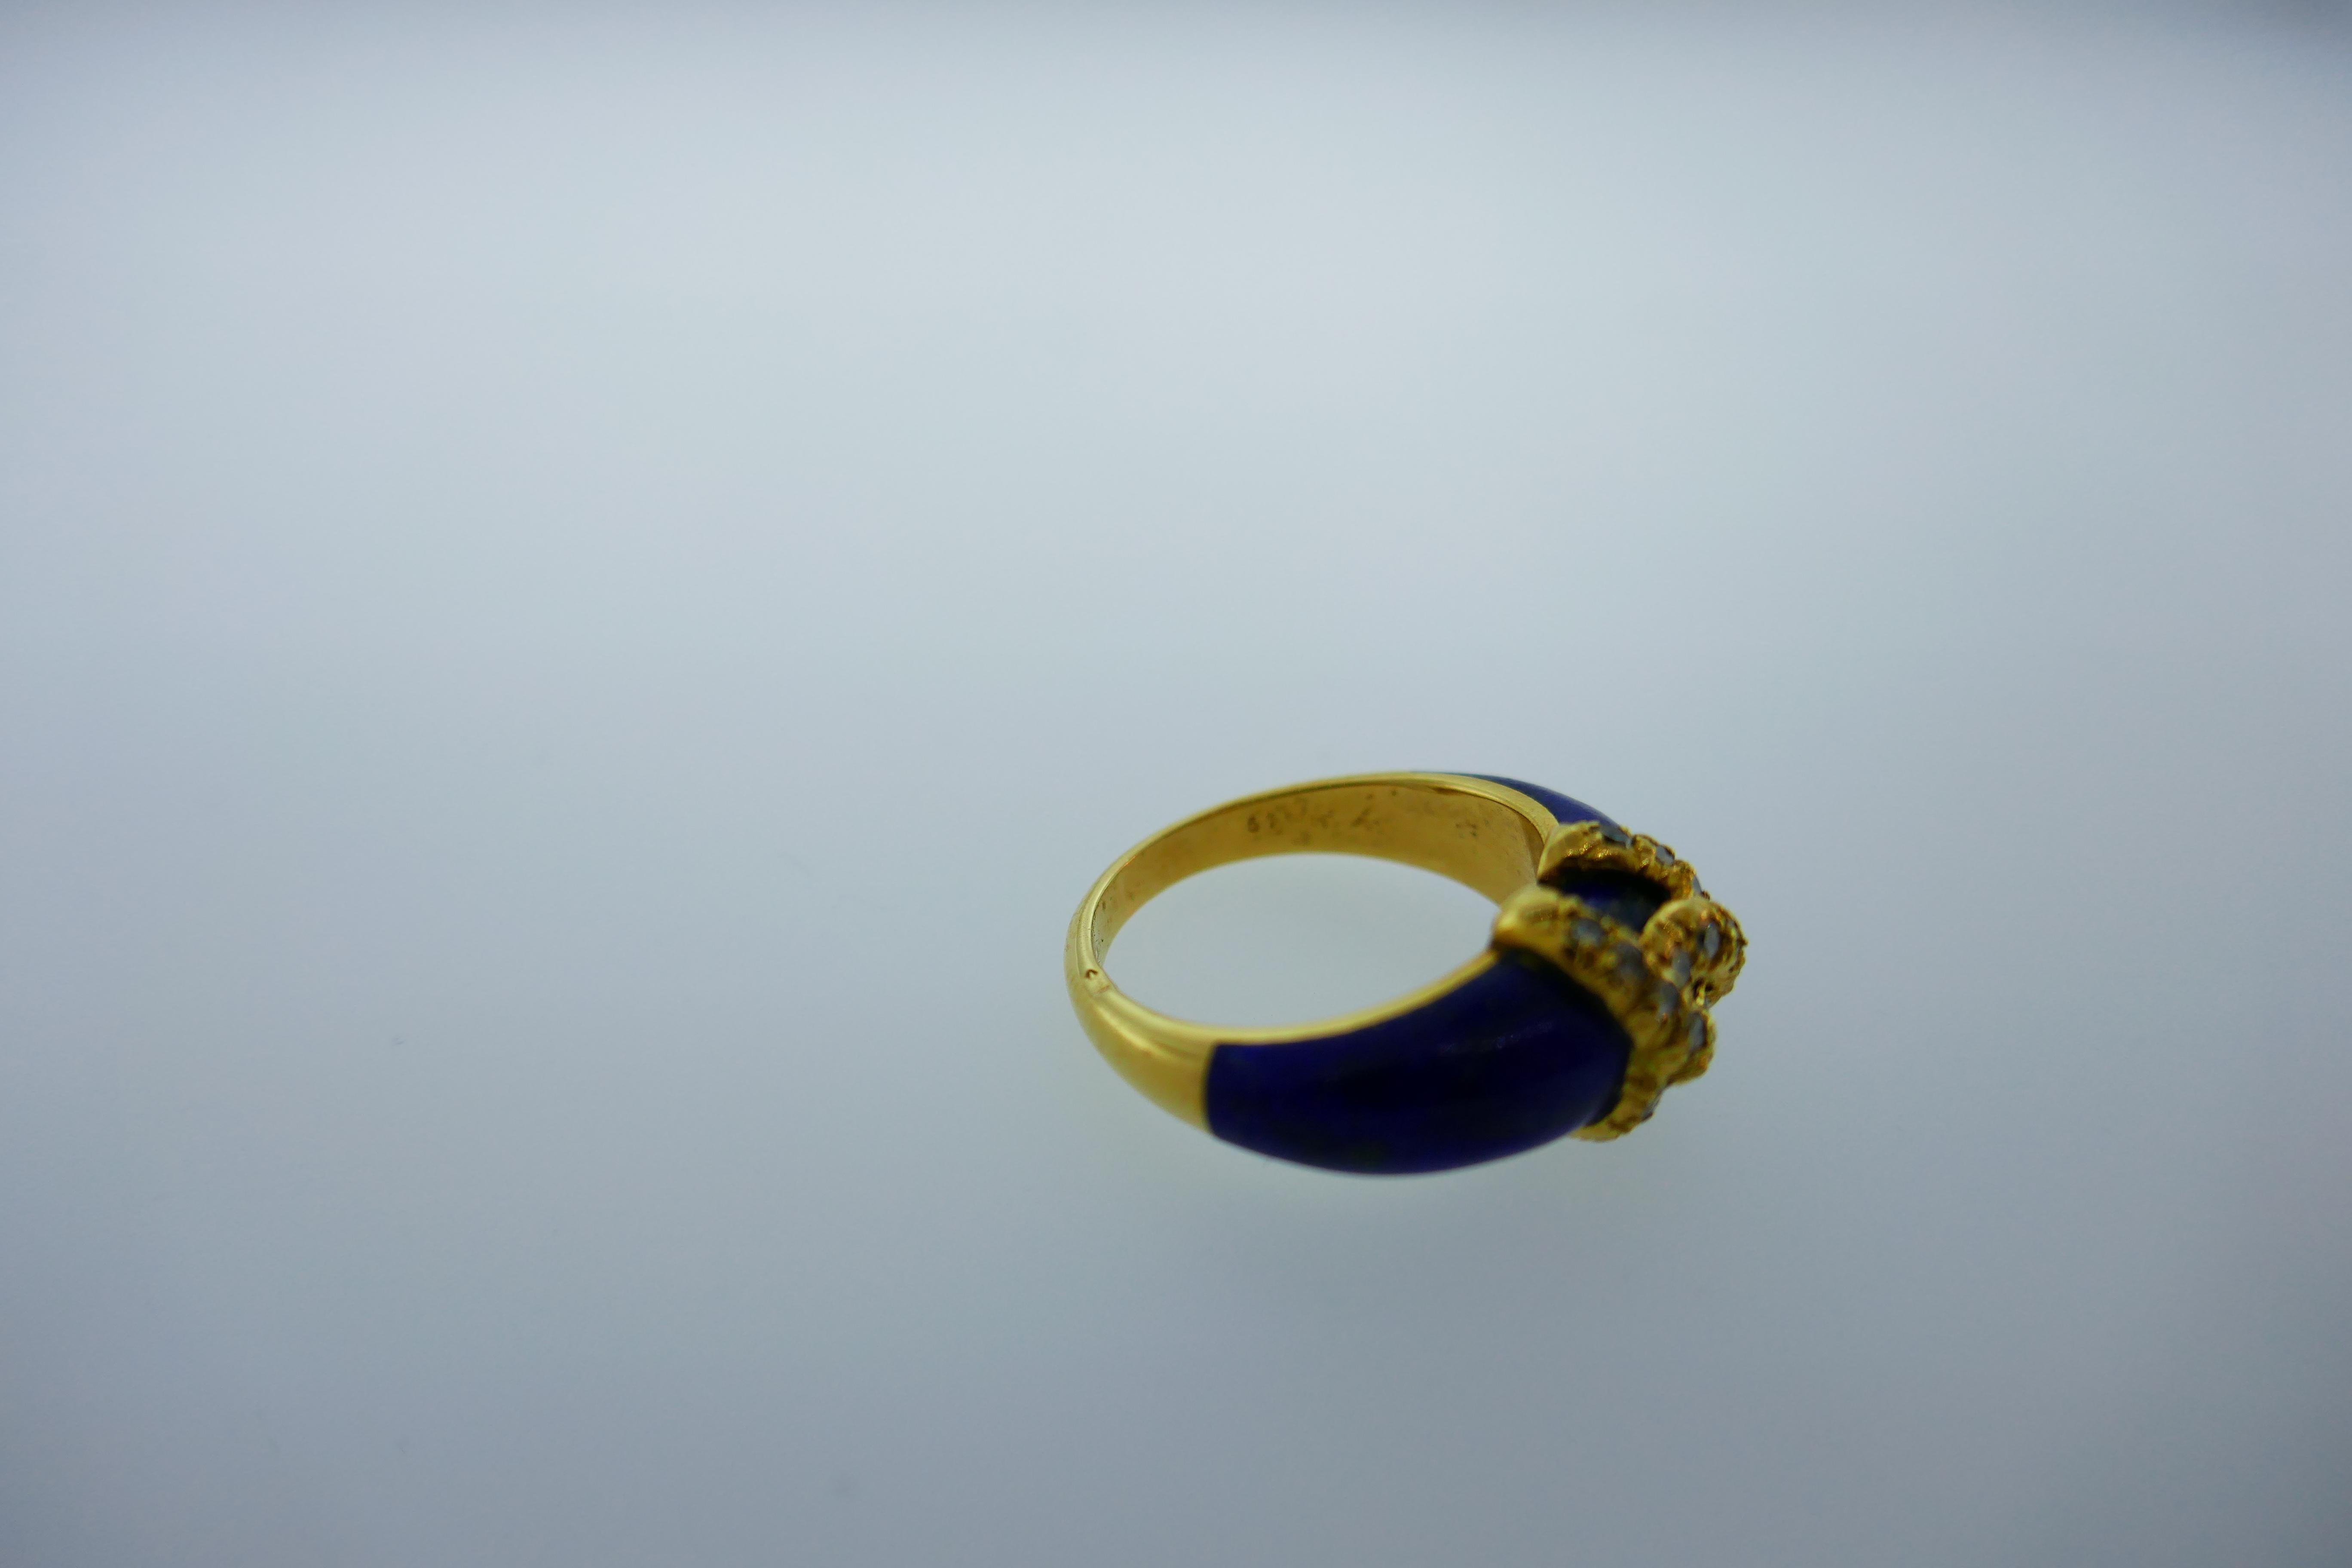 Here is your chance to purchase a beautiful and highly collectible designer ring.  Truly a great piece at a great price! 

Weight: 5.6 grams 

Dimensions: 7/8